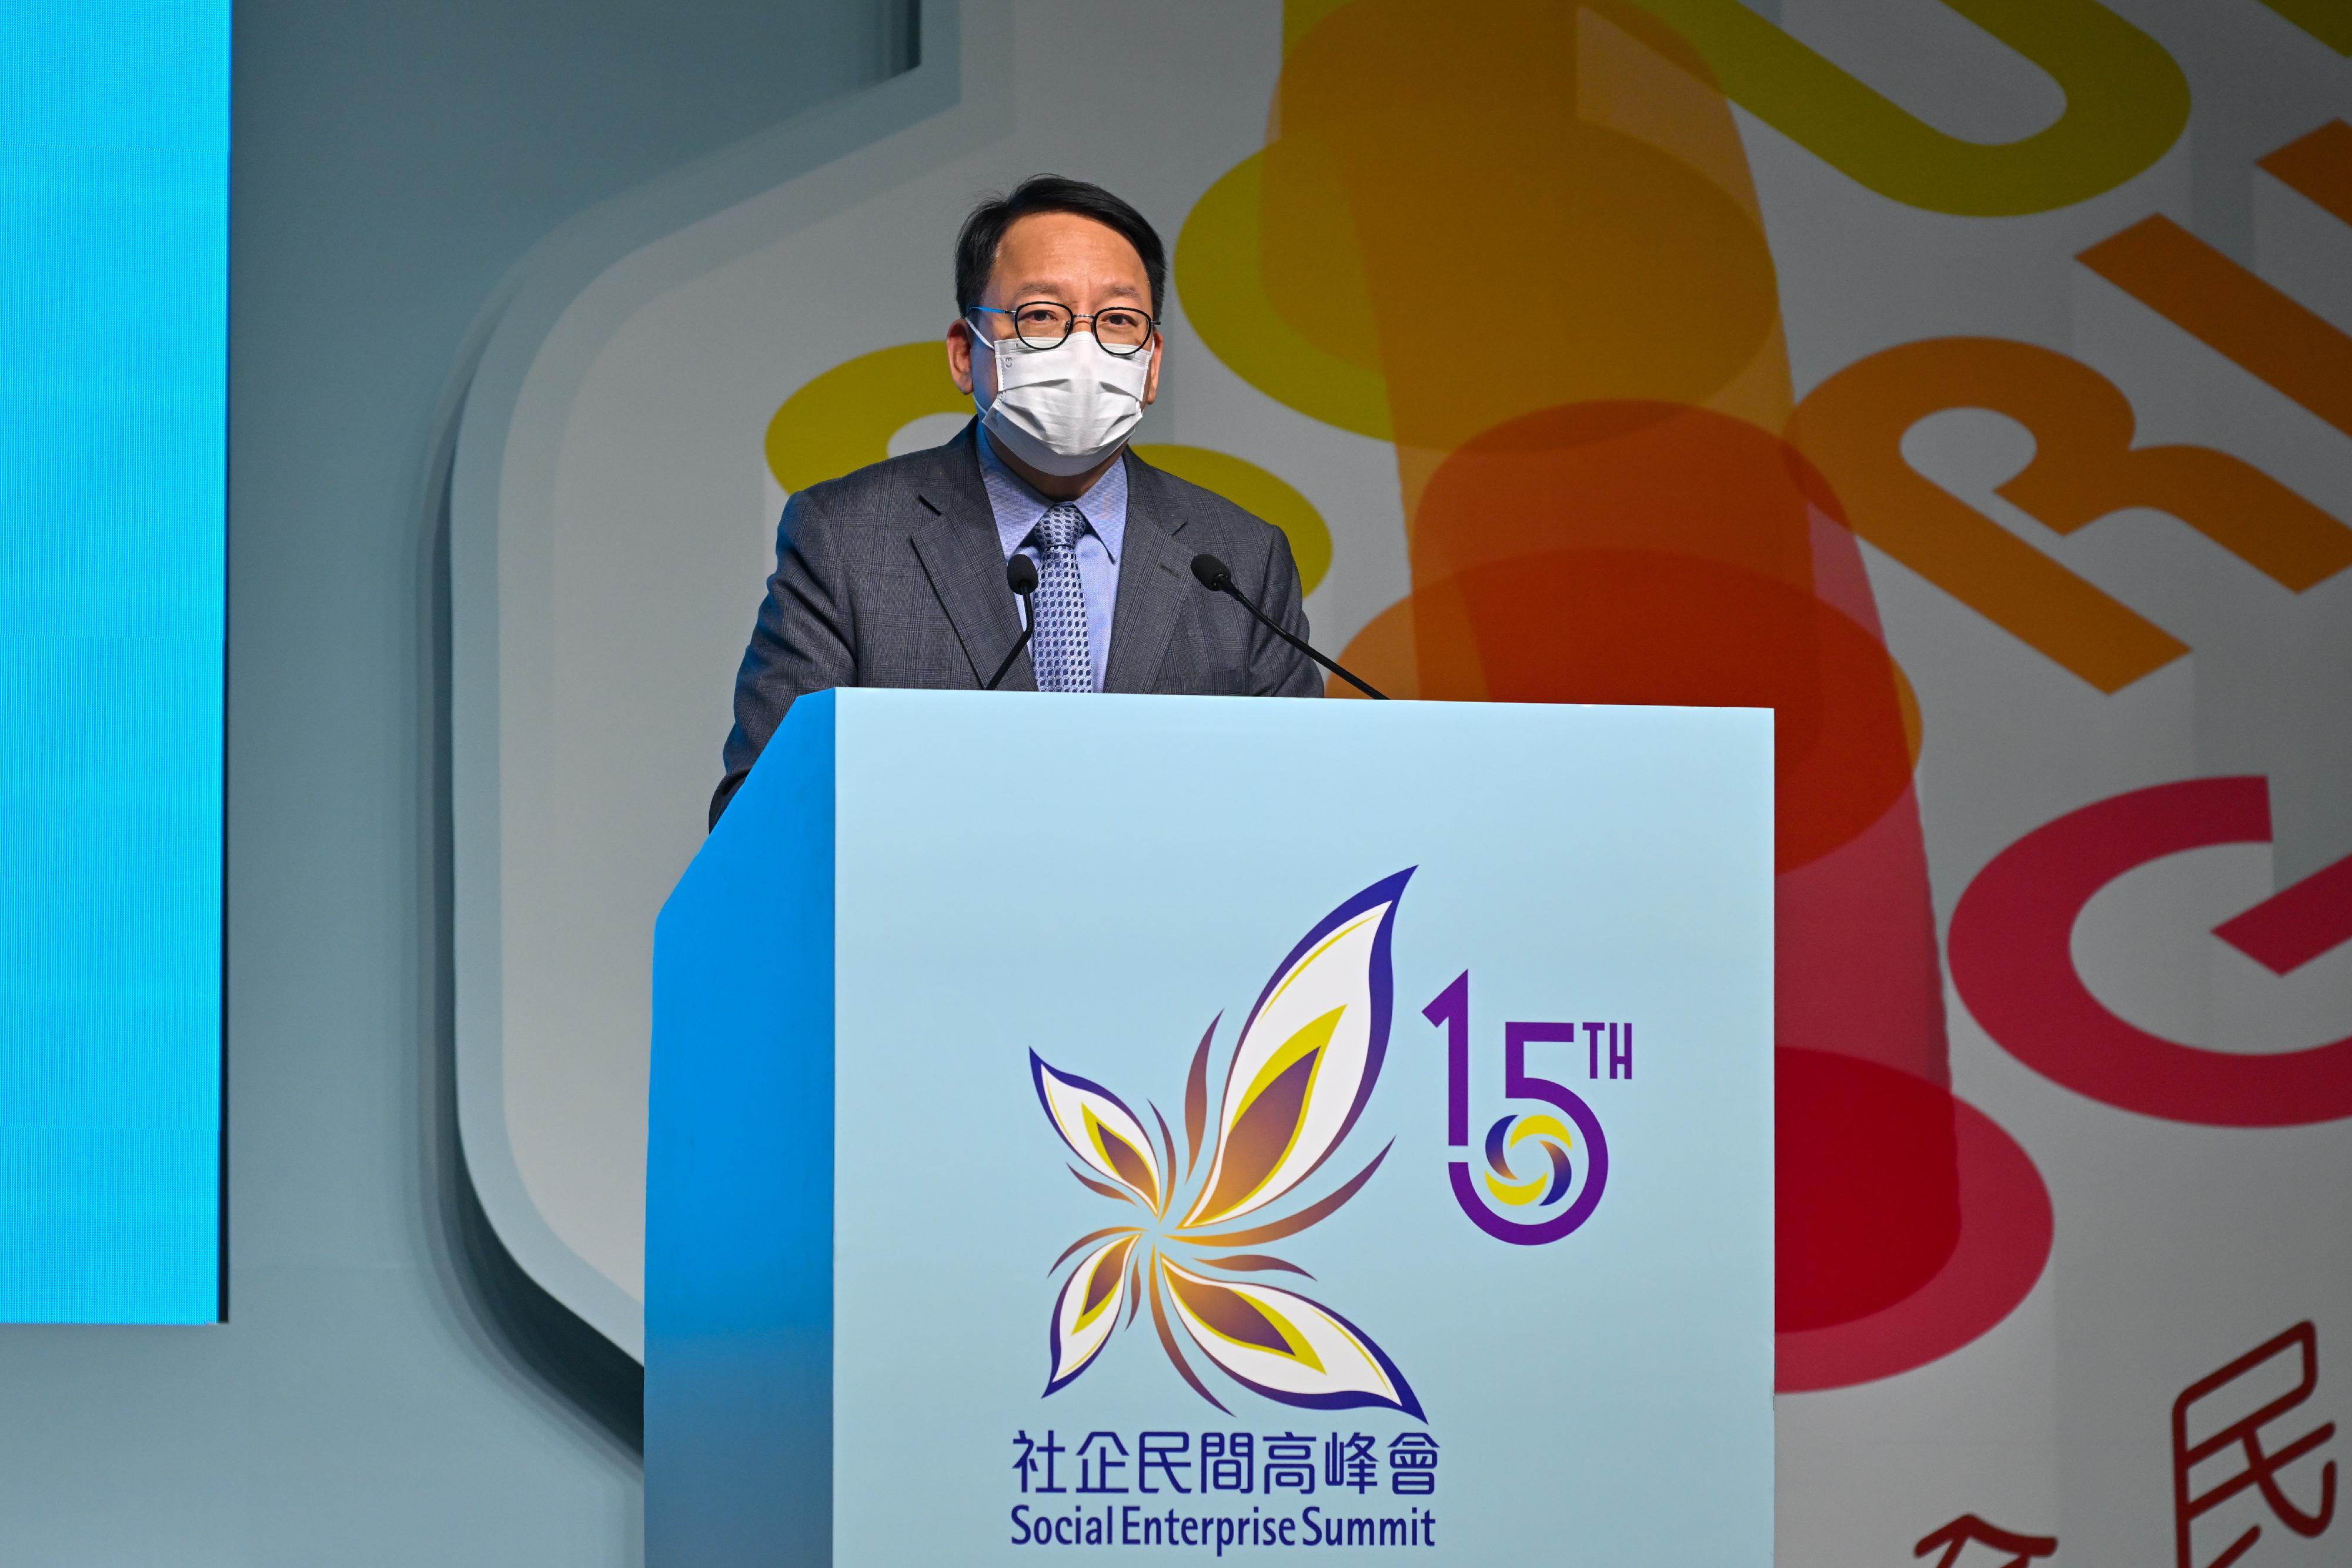 The Chief Secretary for Administration, Mr Chan Kwok-ki, speaks at the opening ceremony of the Social Enterprise Summit 2022 today (November 24).